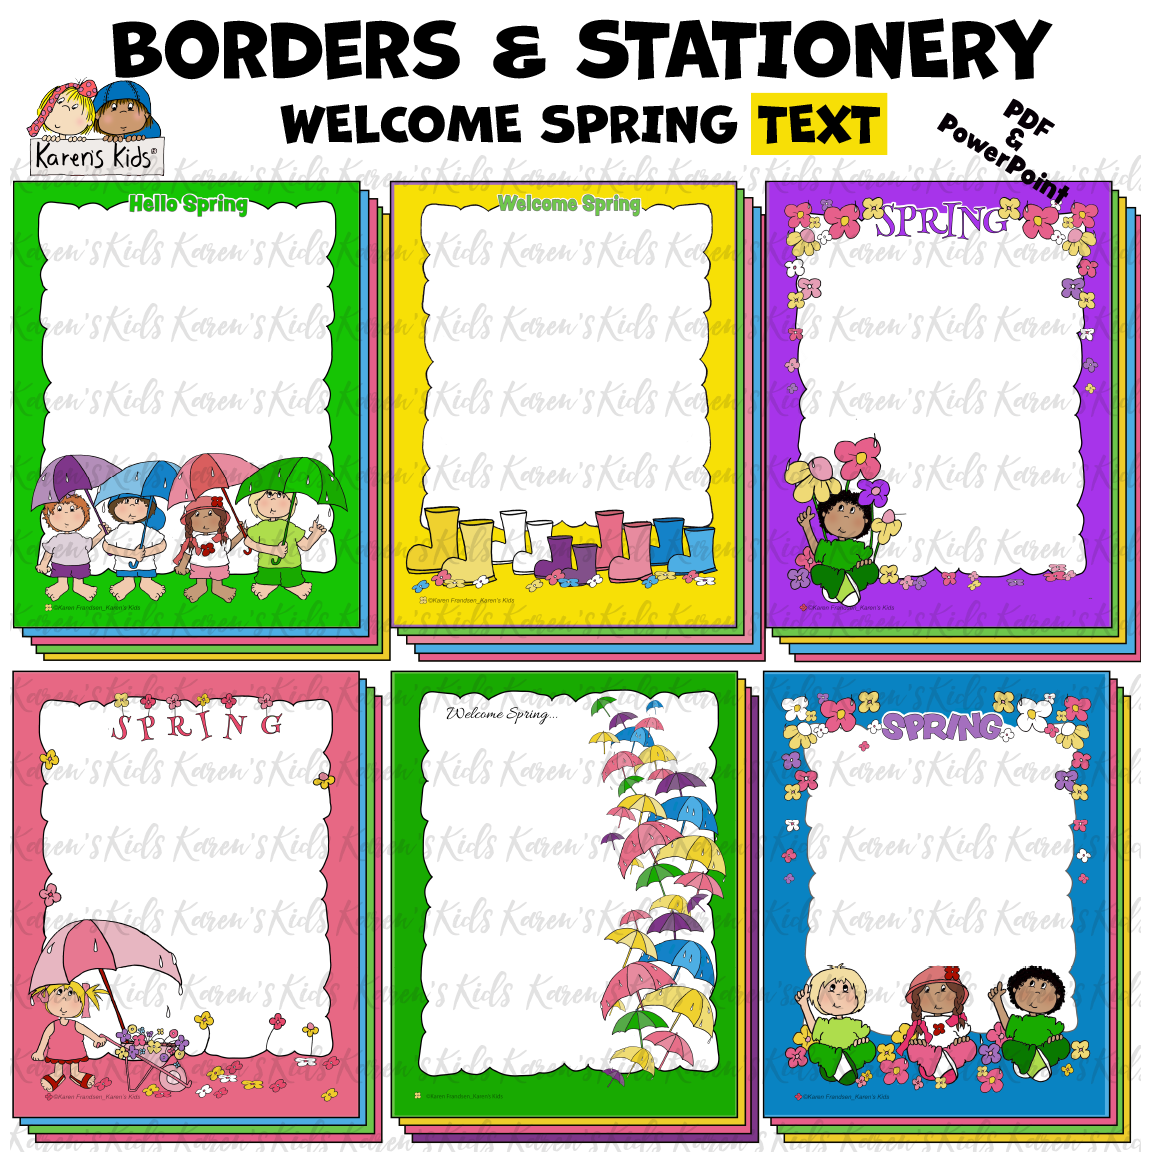 Borders and stationery with fun, colorful spring themes.